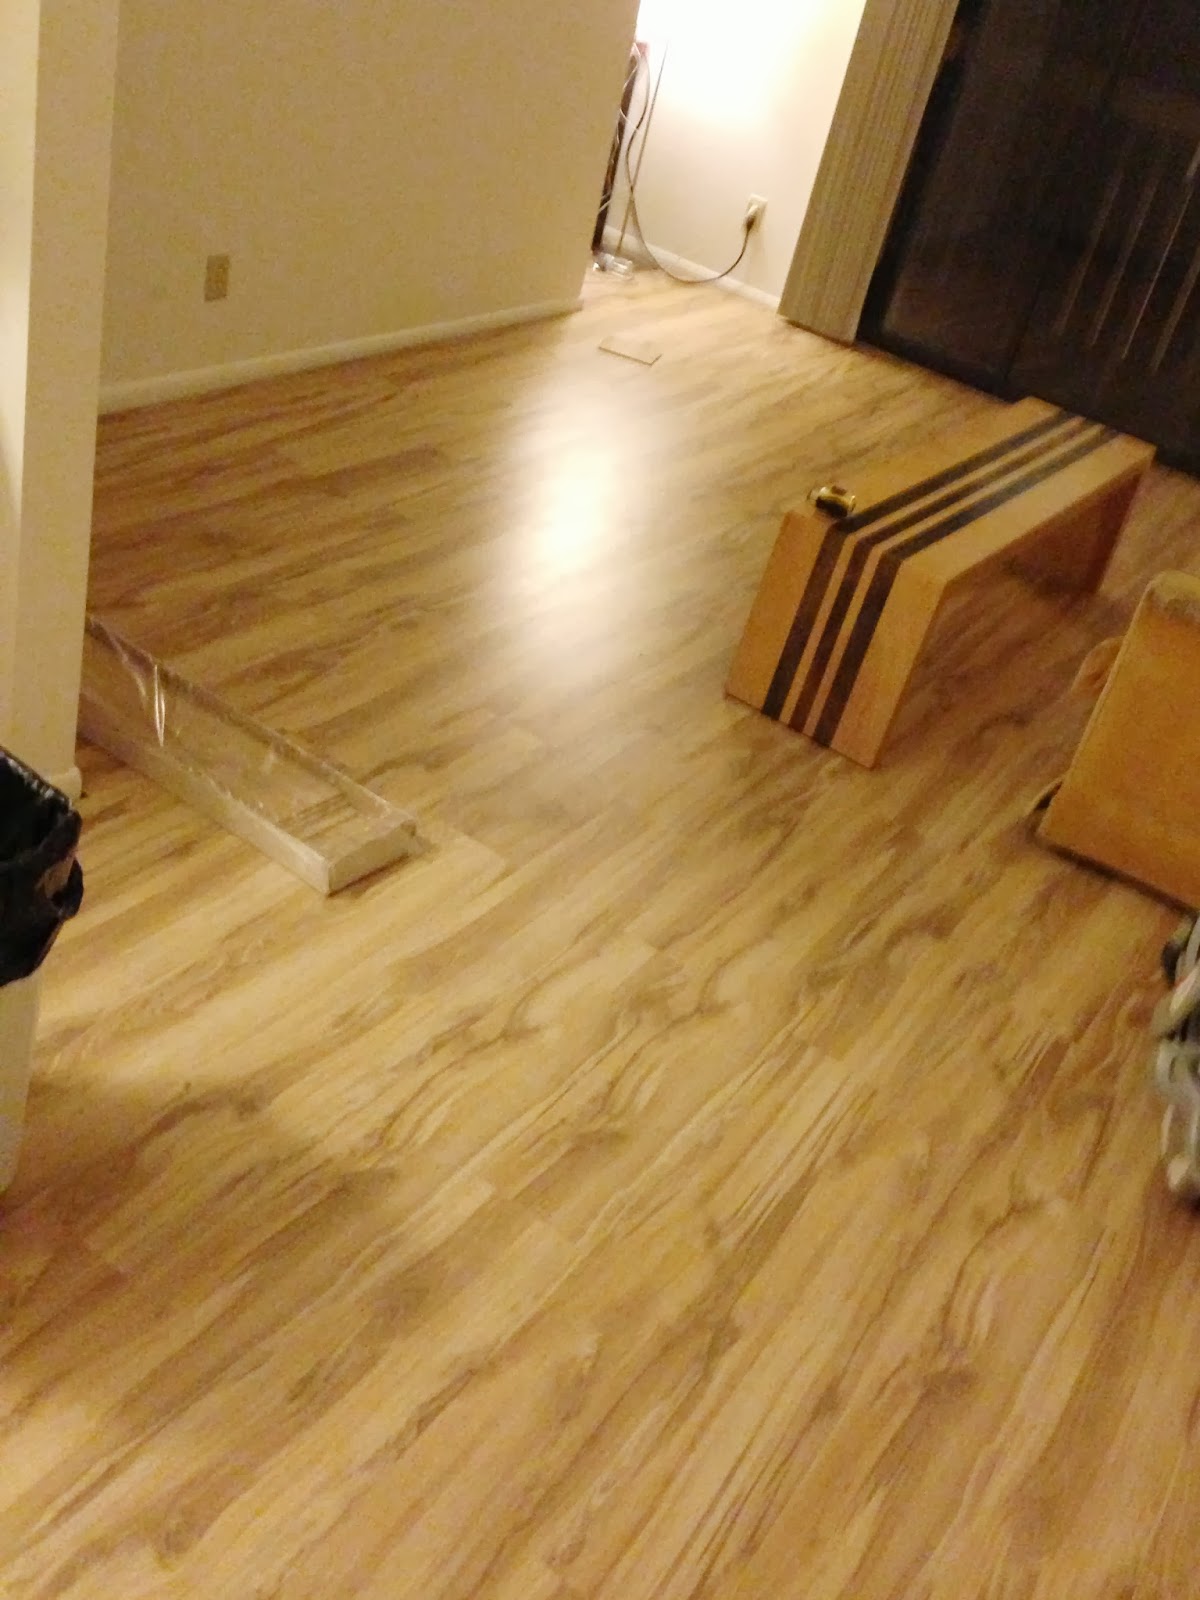 How We Put Hardwood Over Carpet Messymom, Can You Install Laminate Flooring On Top Of Carpet